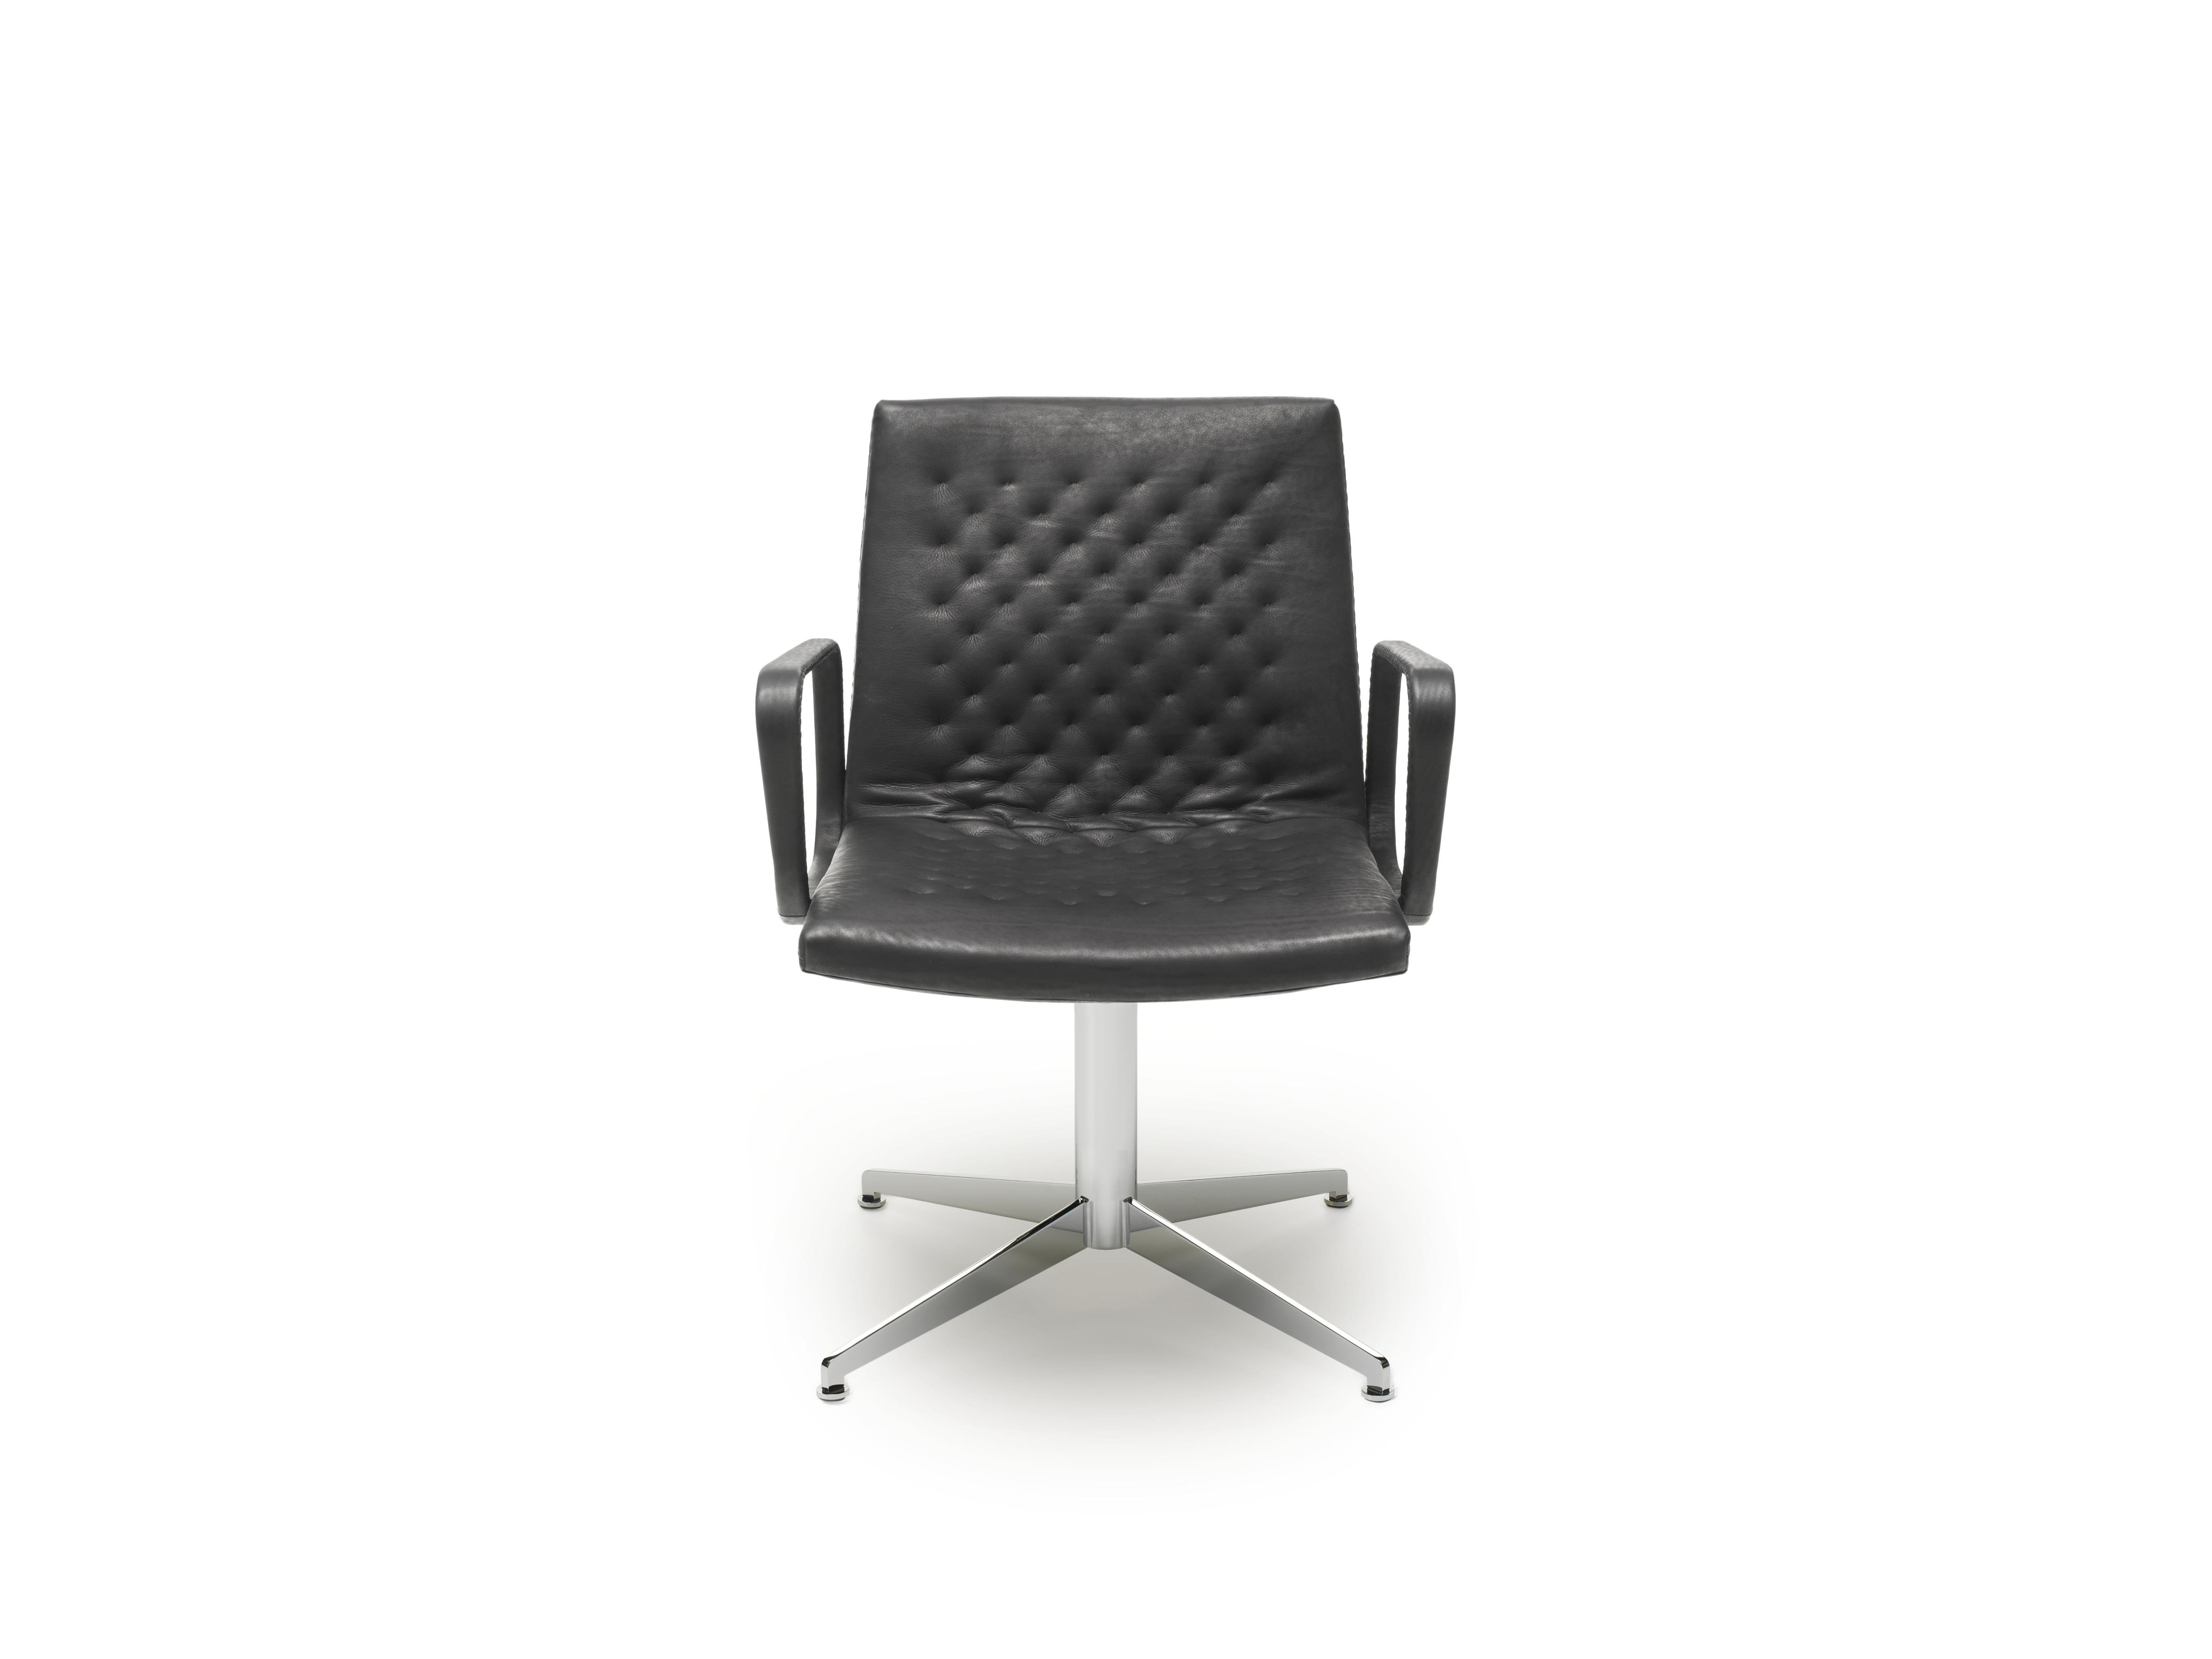 DS-1051 office chair by De Sede
Dimensions: D 46 x W 73 x H 93 cm
Materials: chrome-plated, leather

Prices may change according to the chosen materials and size. 

An all-rounder for the boss in us

DS-1051 is available in a wide variety of